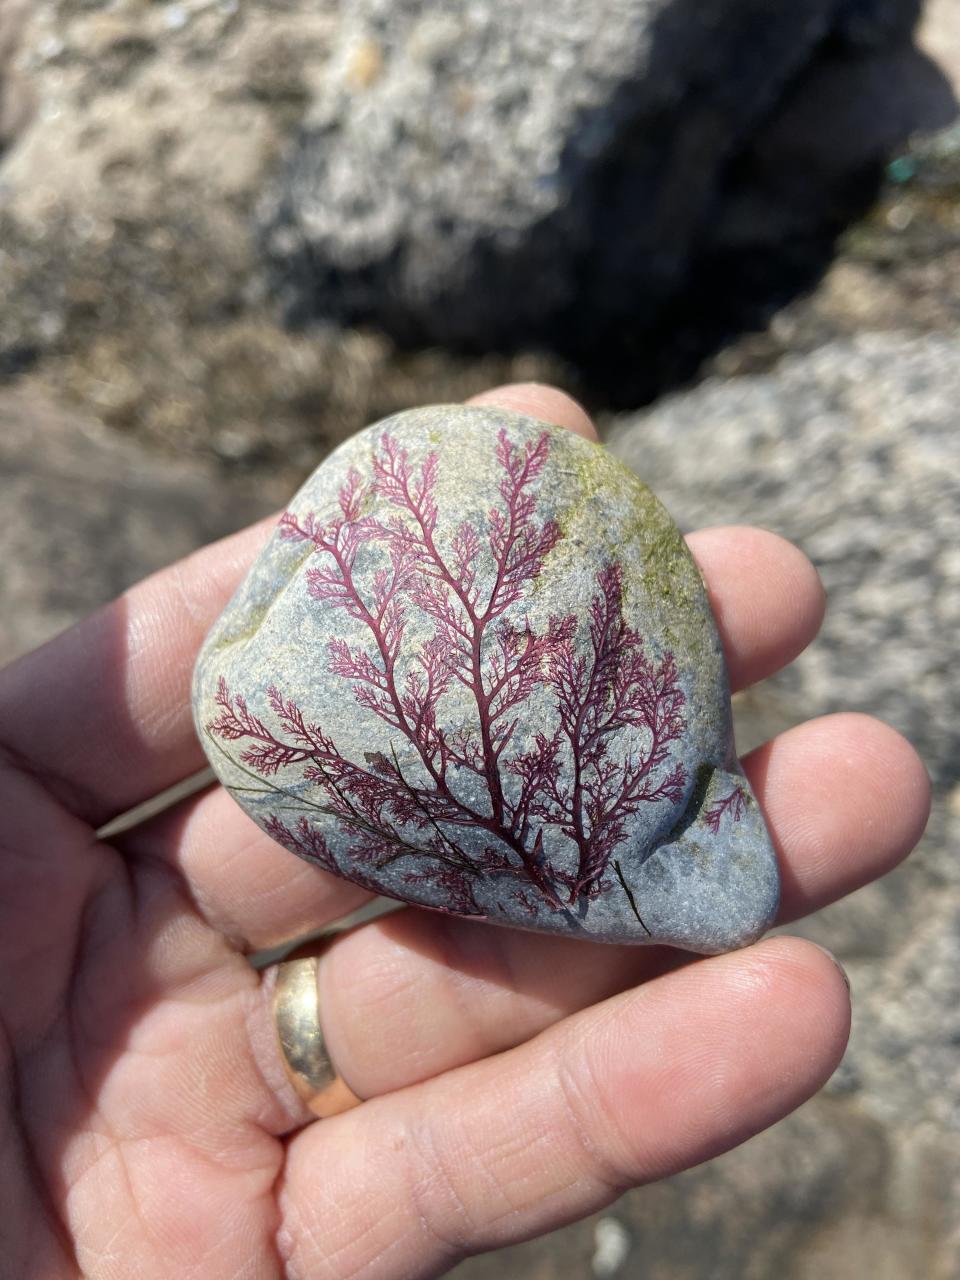 a small stone in someone's hands that has branch-like patterning from seaweed stuck to it